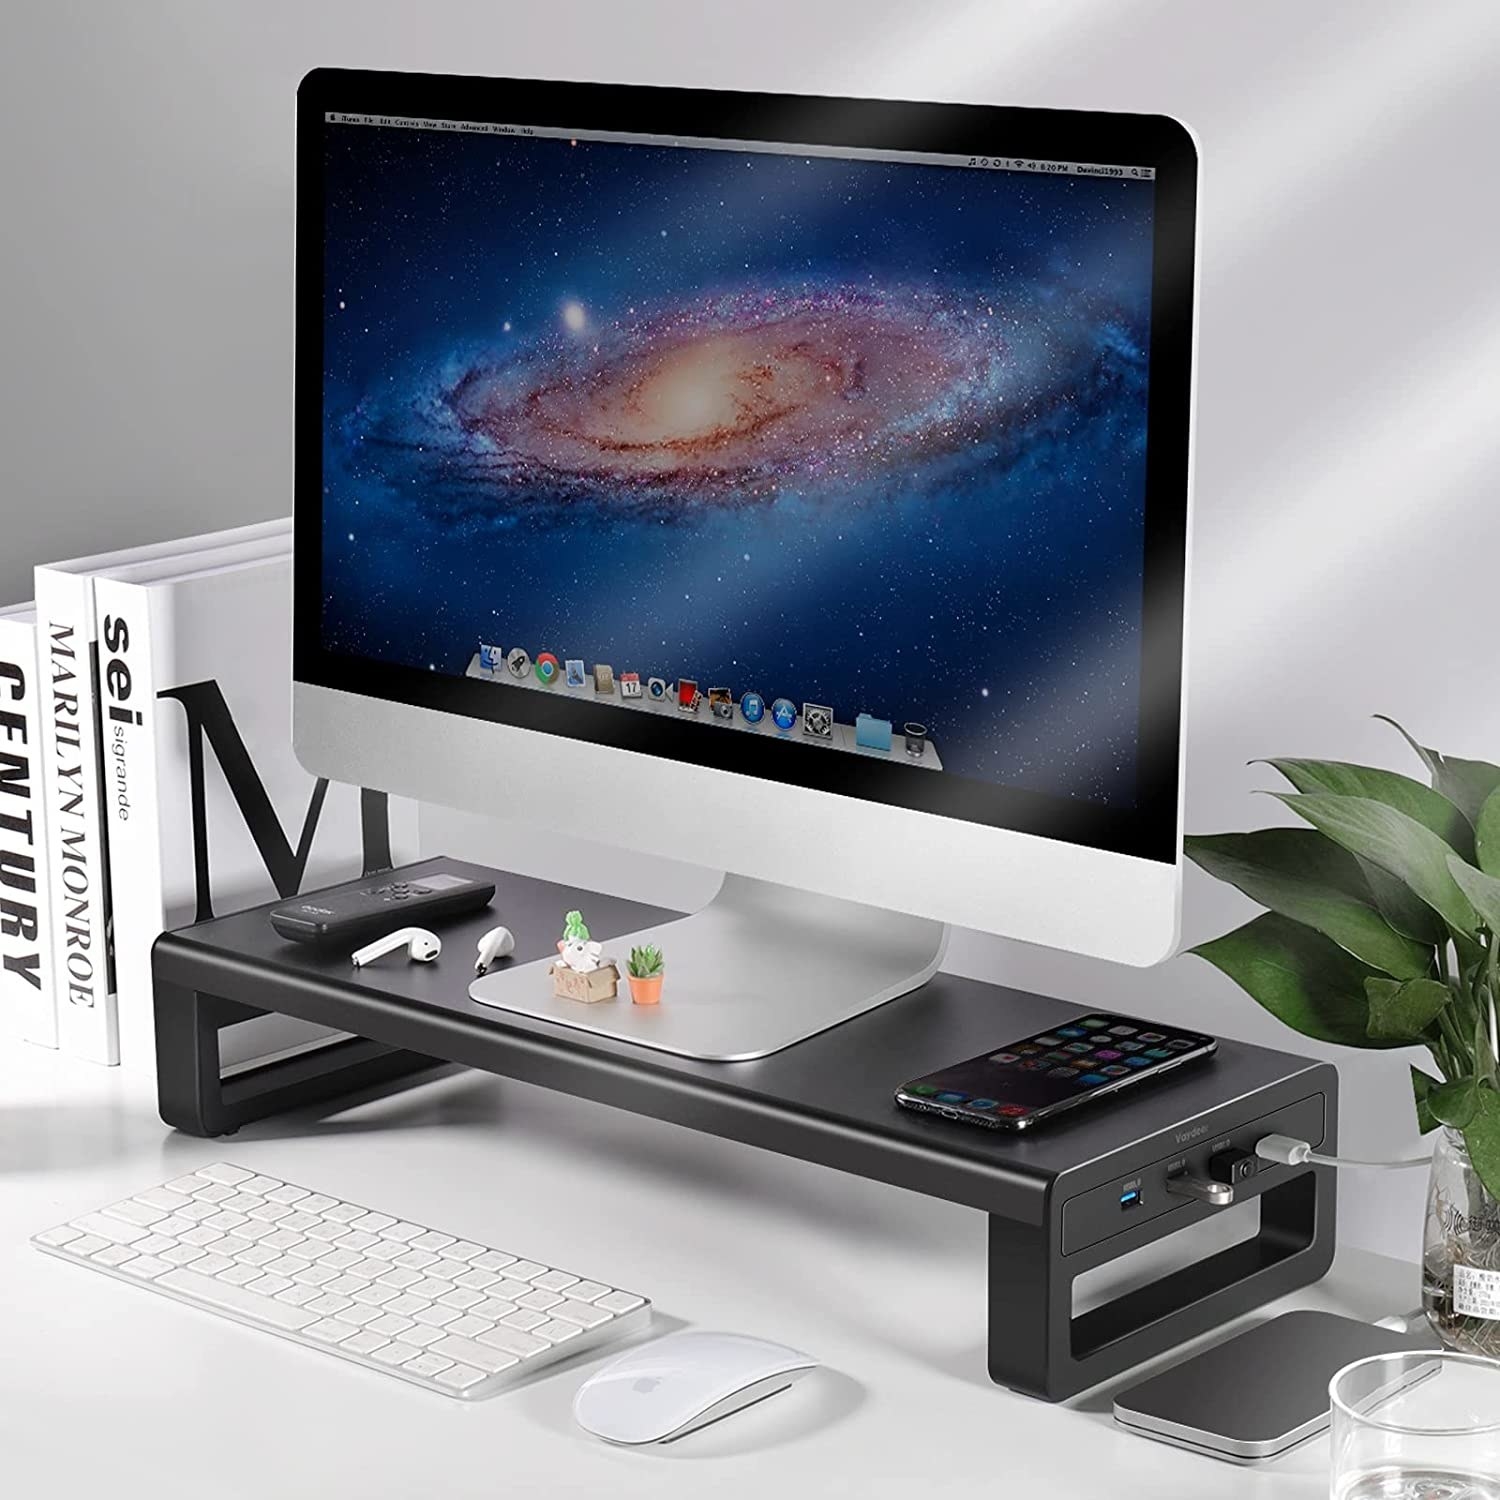 a black monitor riser with usb ports on the side with a monitor sitting on it